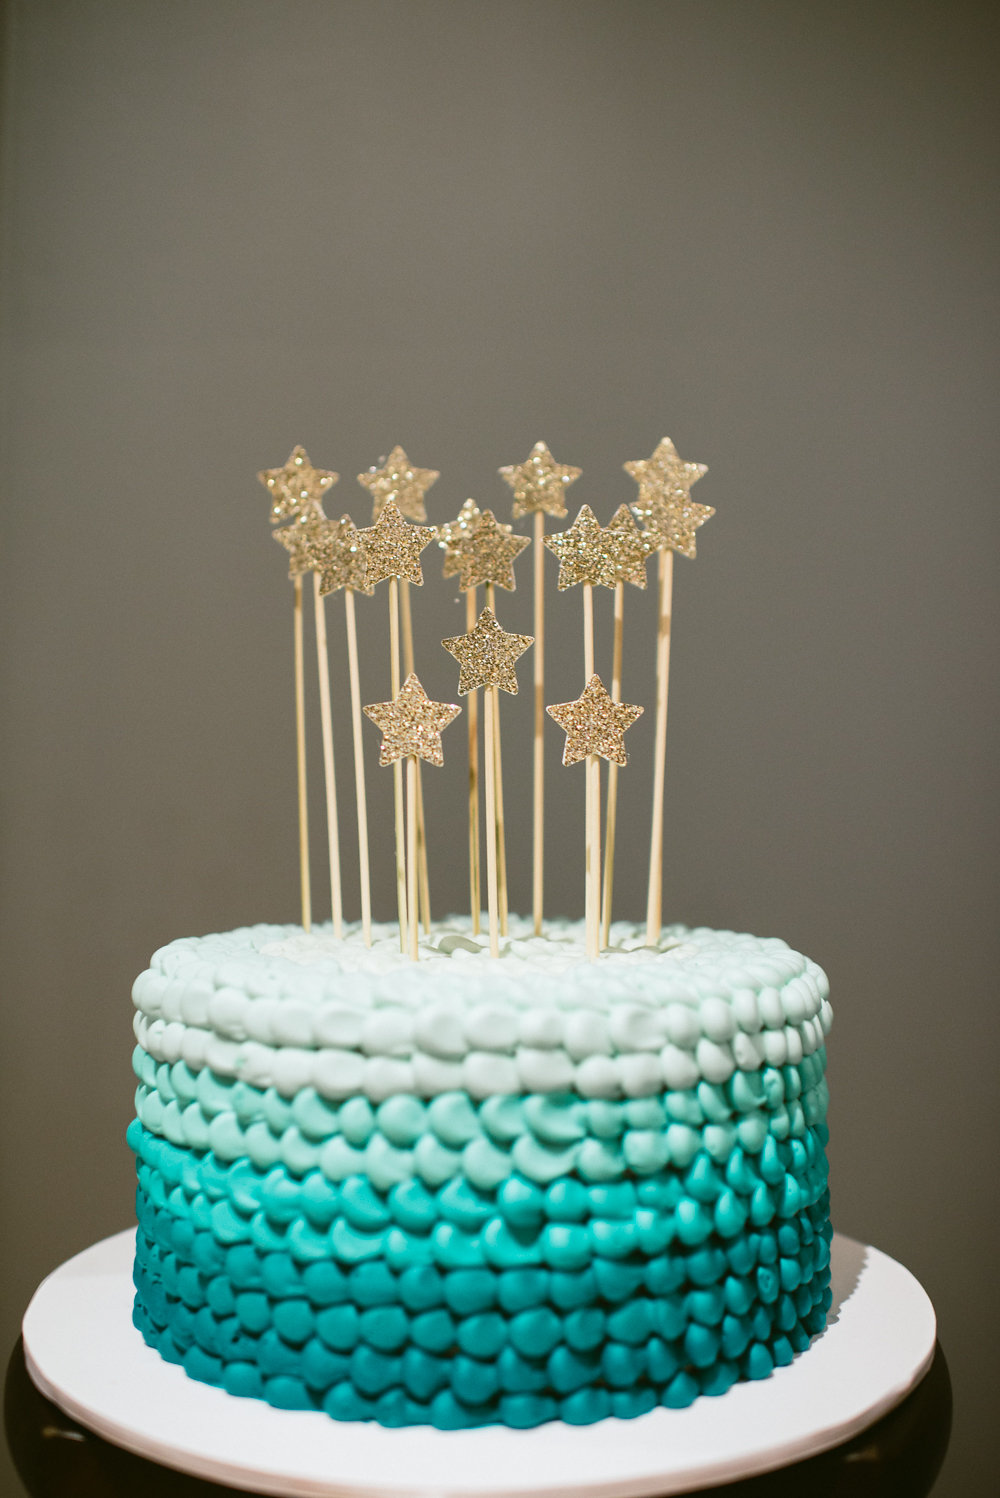 Teal Ombre Cake for this Wish Upon a Star Baby Shower